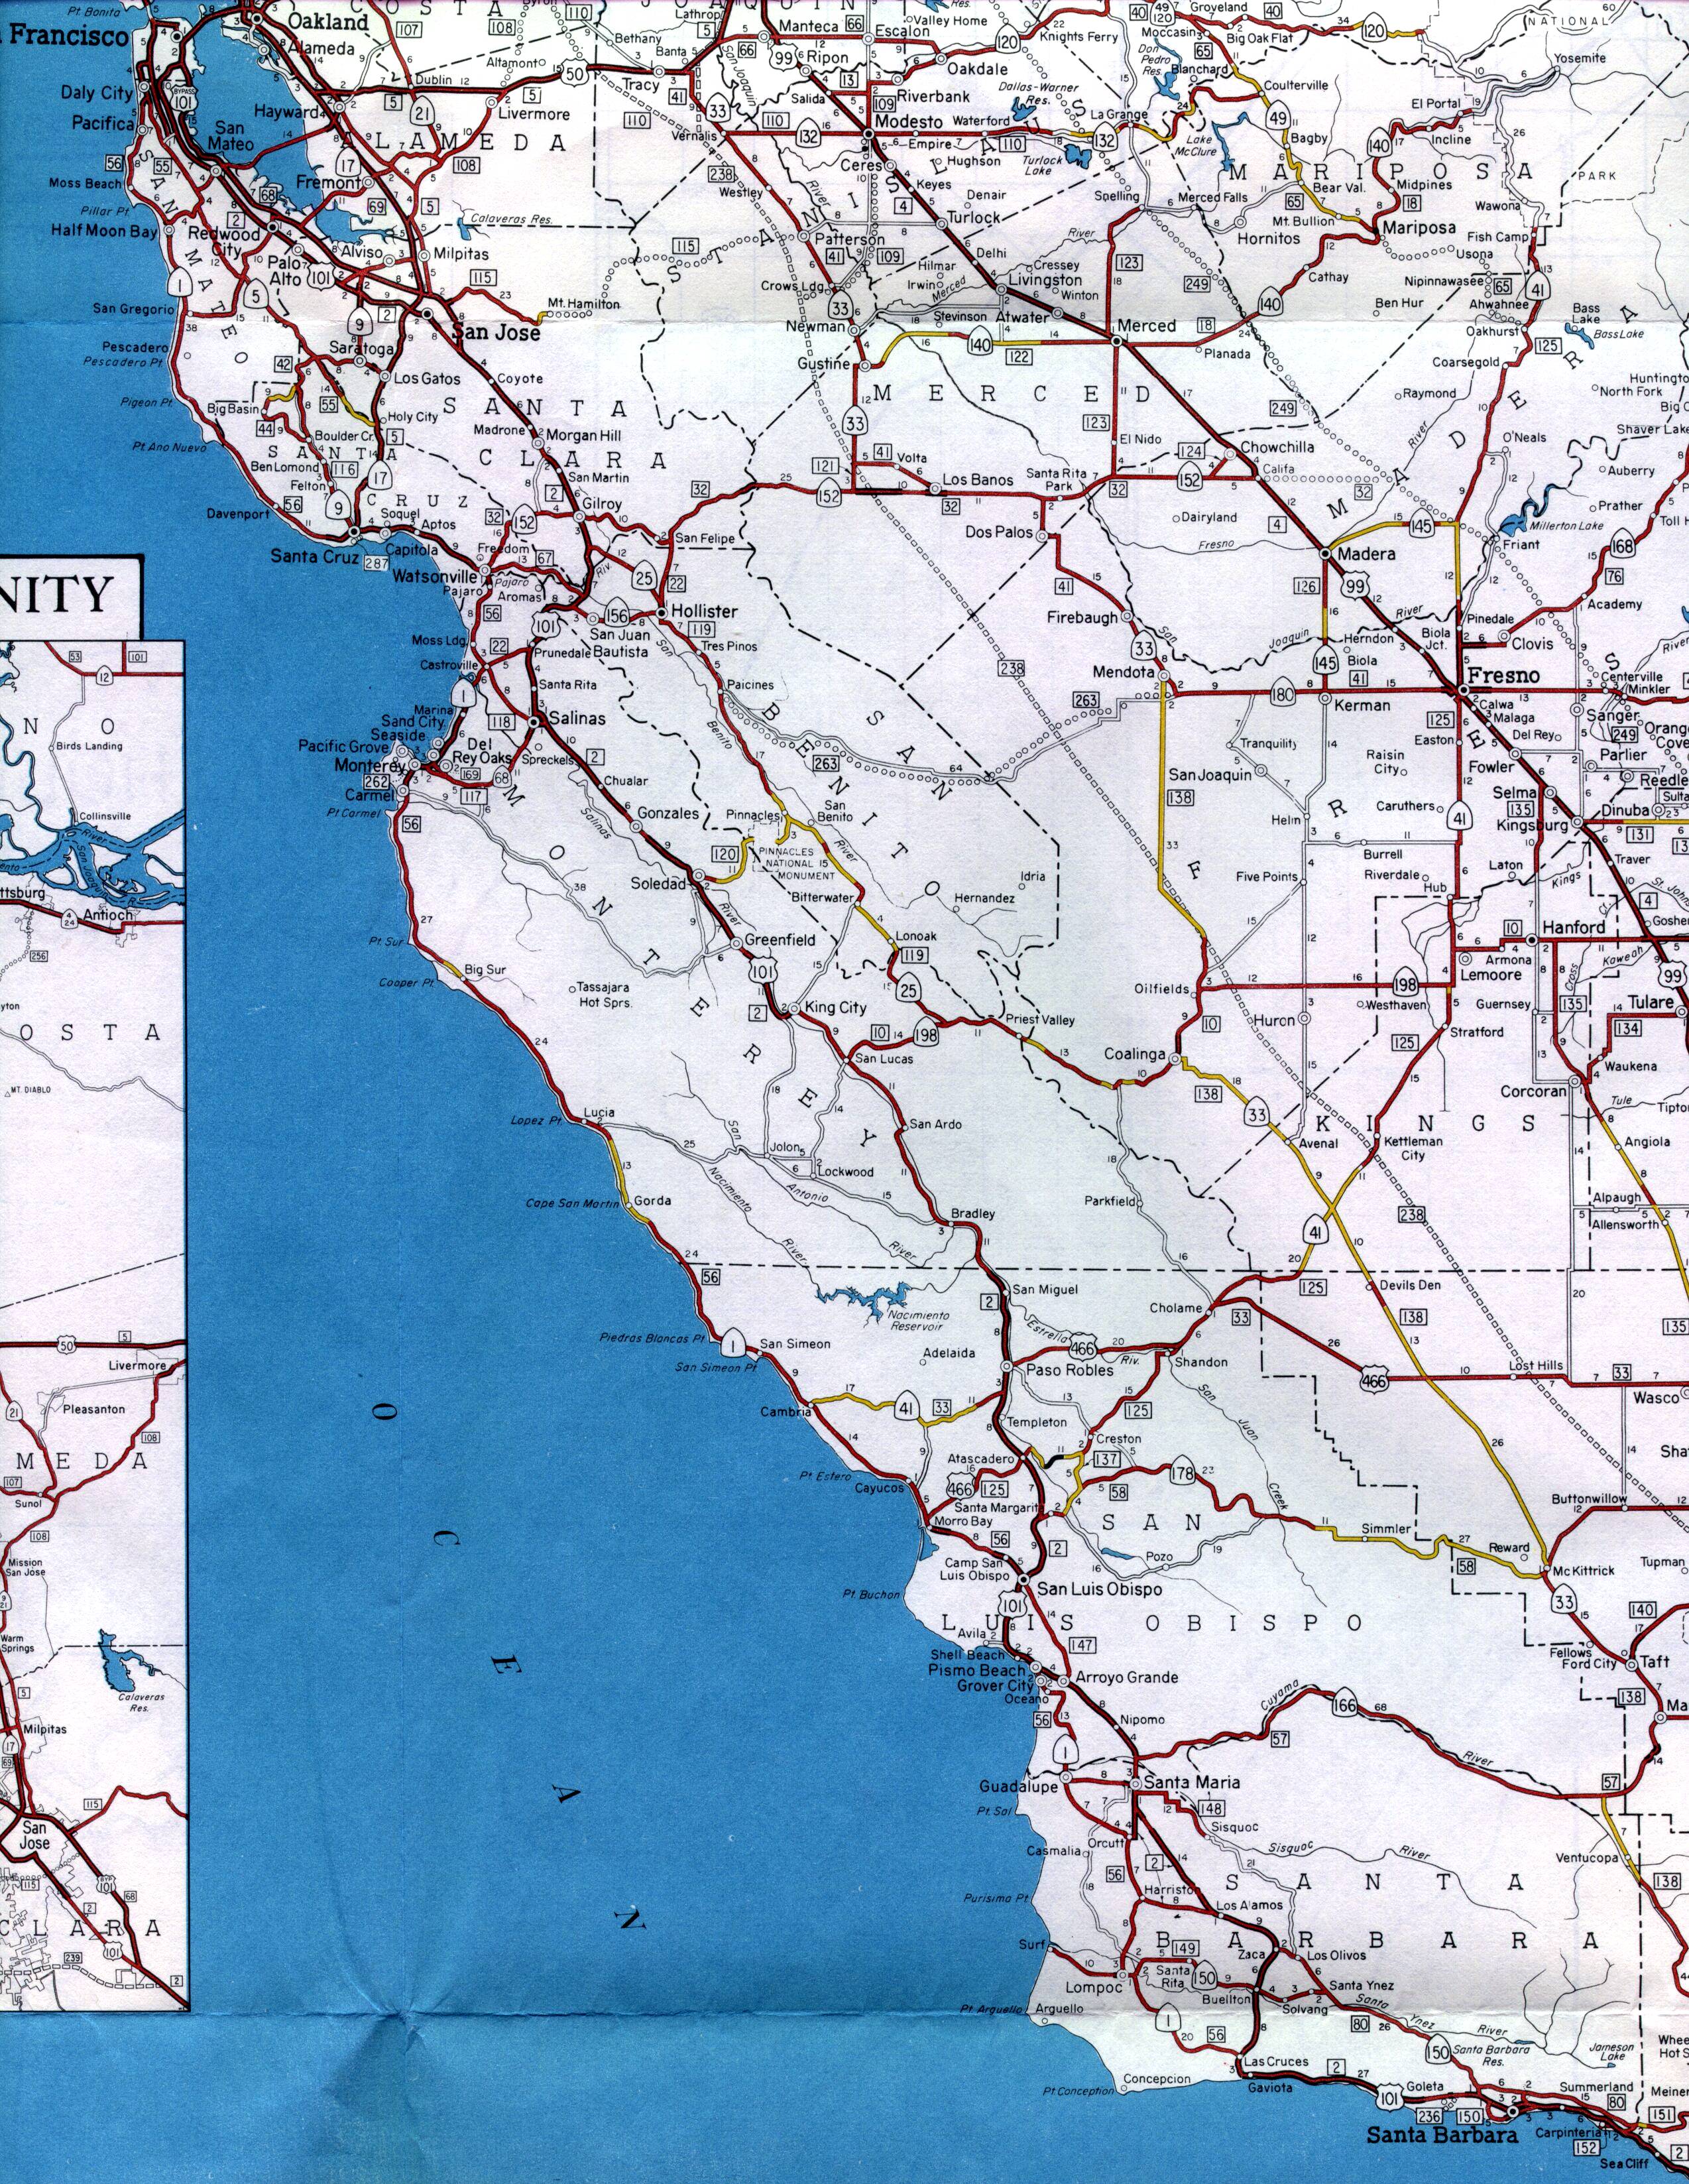 Central coast region of California (1961 official map)